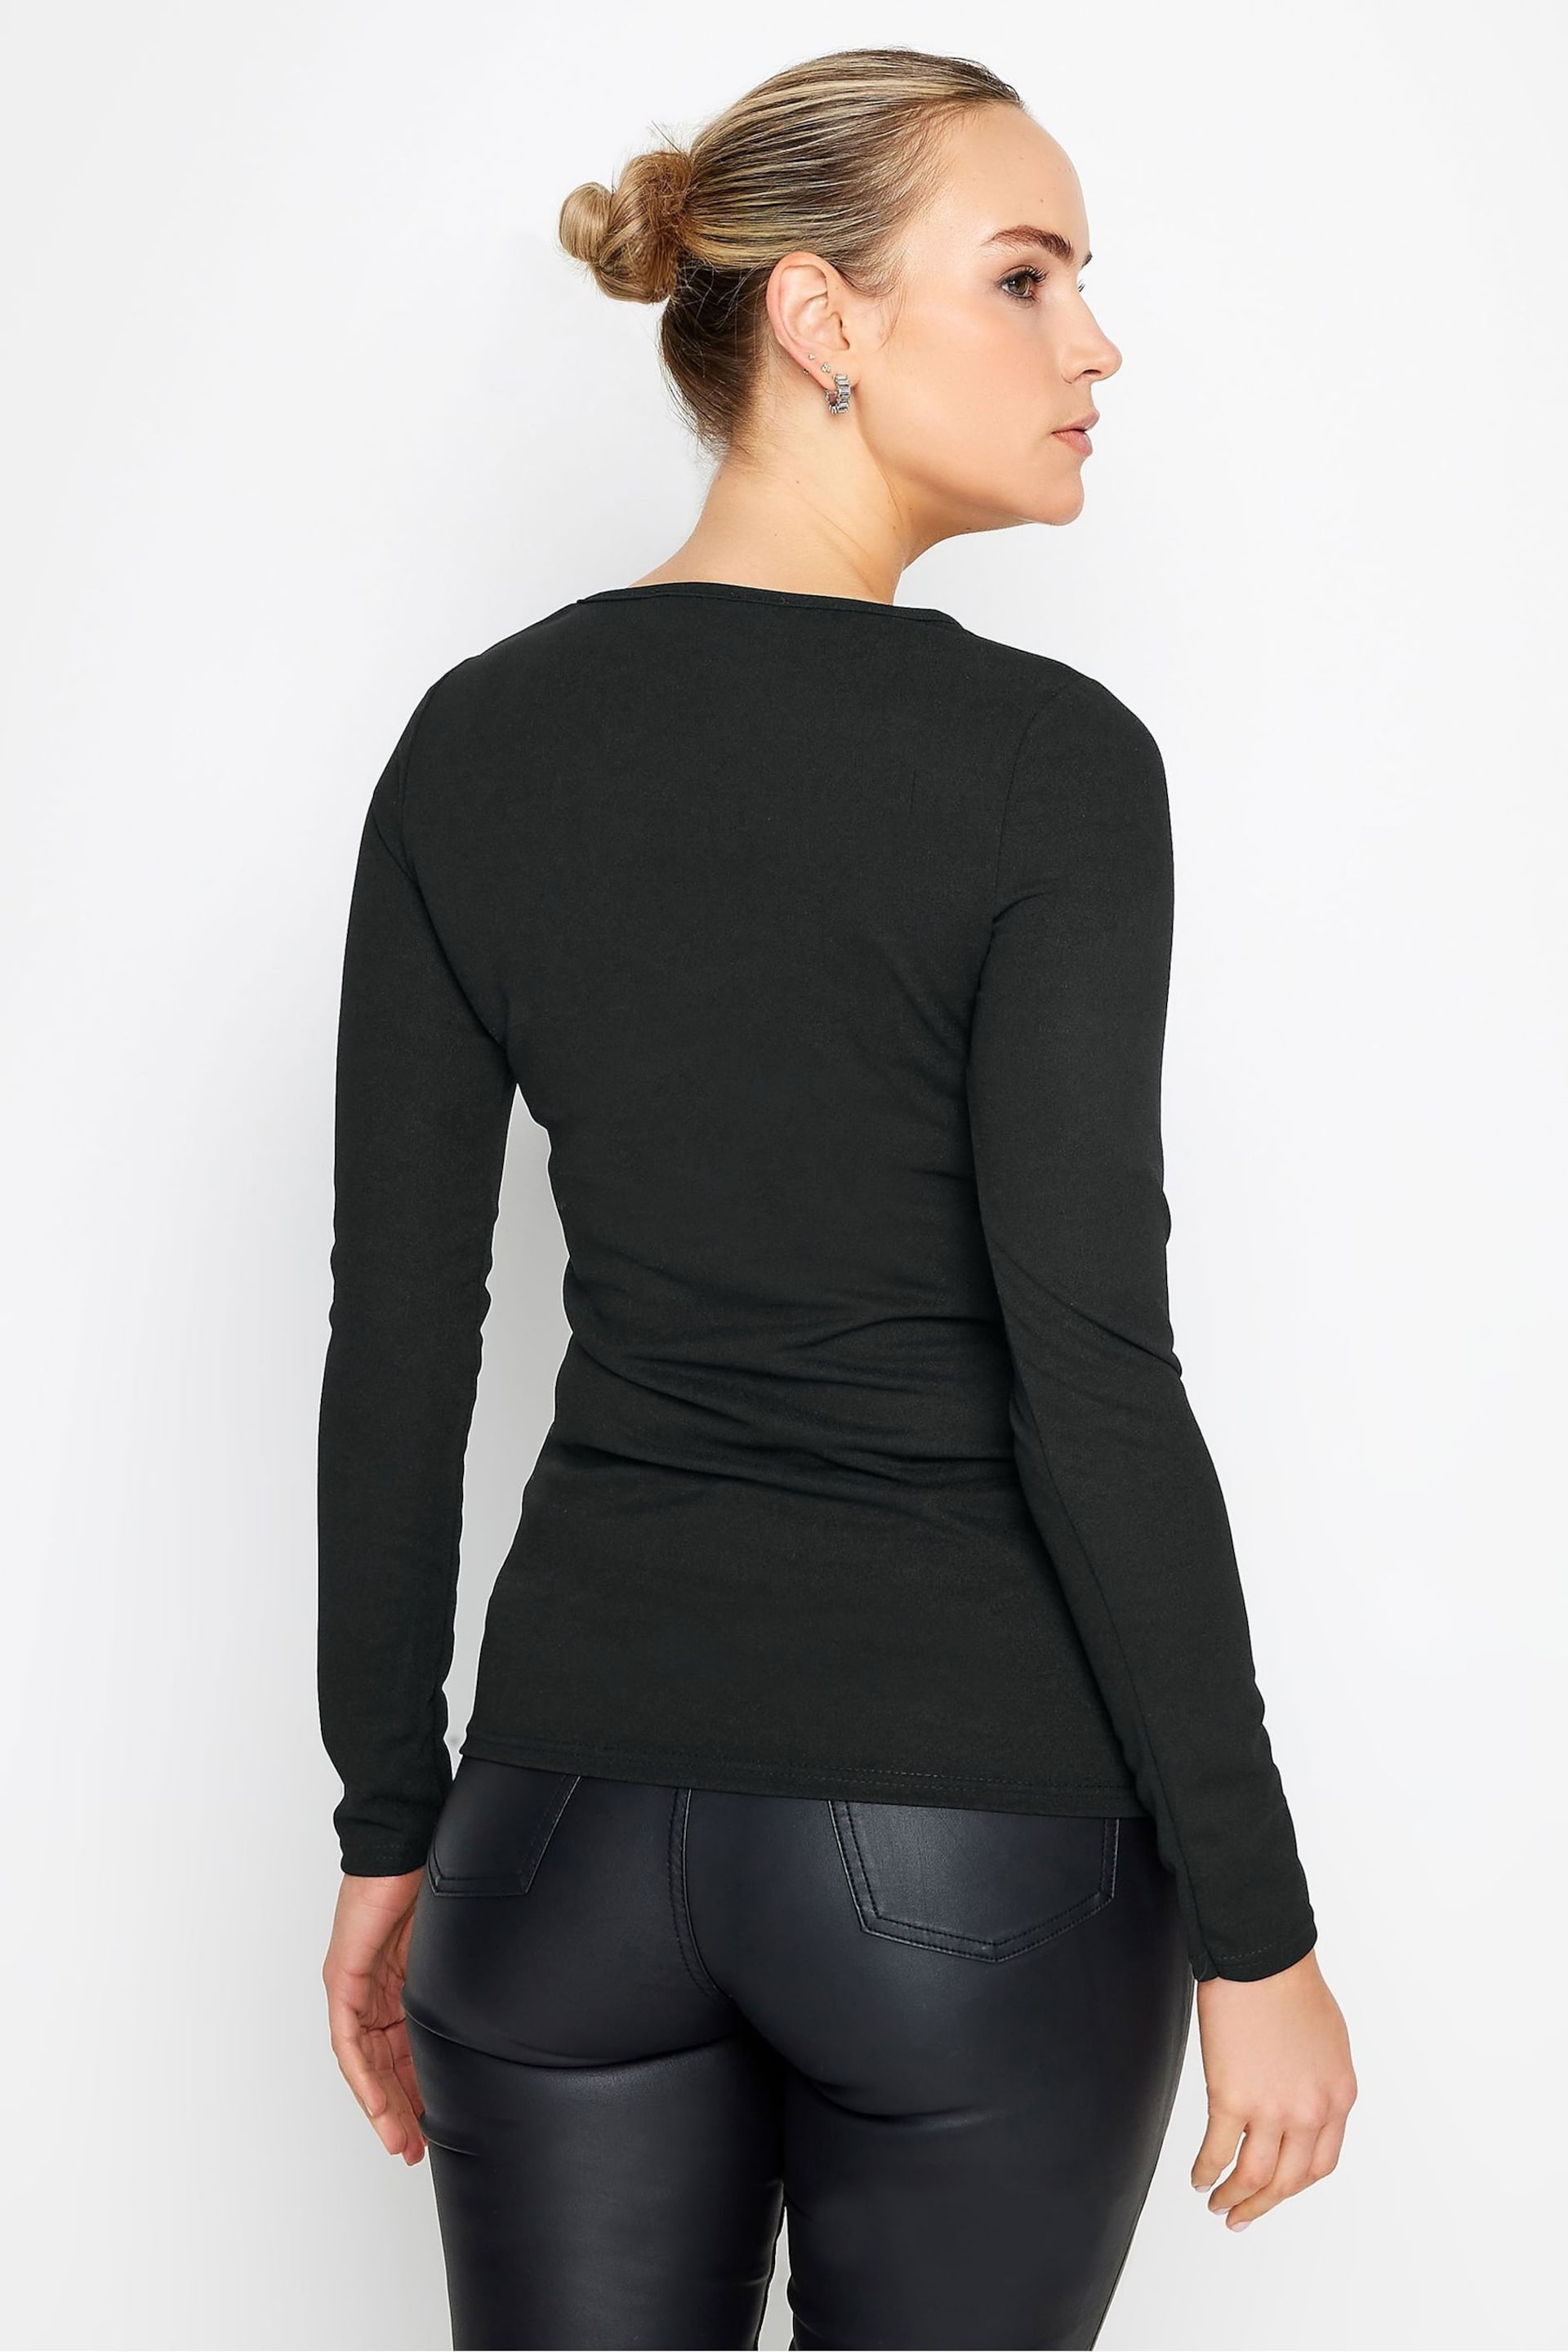 Long Tall Sally Black Cut Out Top - Image 2 of 4